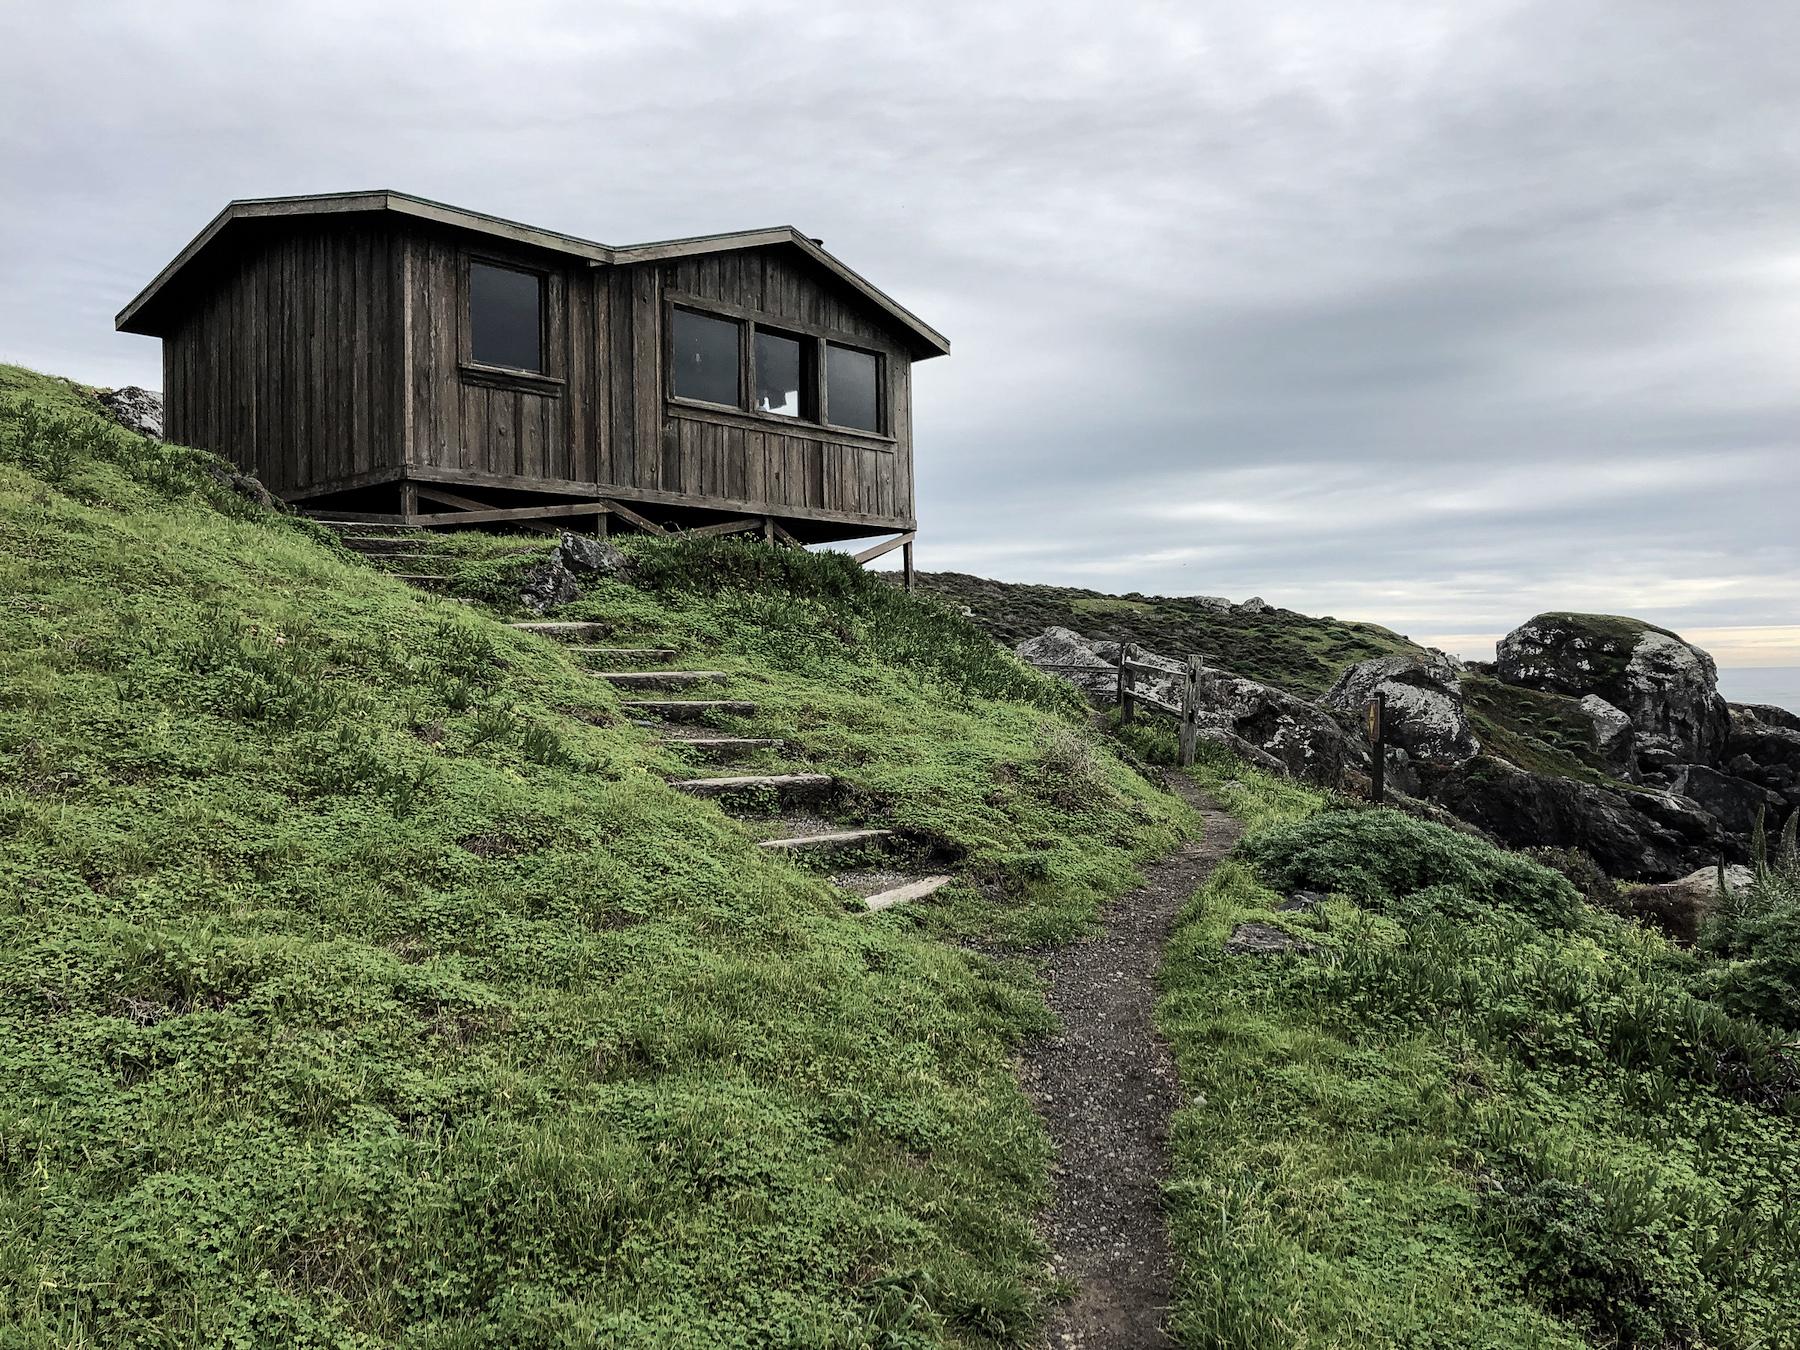 Steep Ravine cabins: Tired of hotels with electricity, heat, and indoor plumbing?